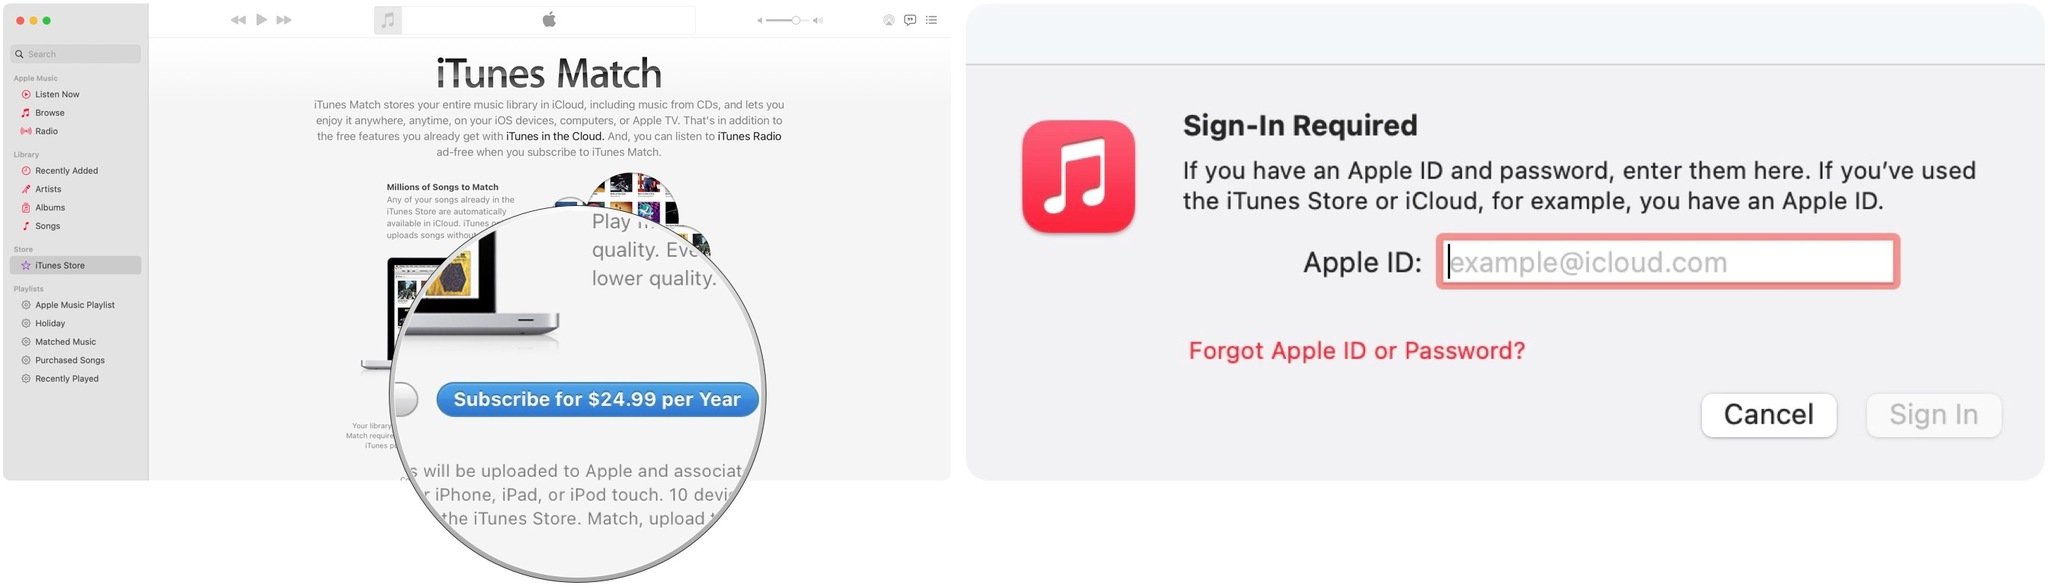 To enable iCloud Music Library on your computer with iTunes Match, select Subscribe for $24.99 per year, then enter your Apple ID and password. Choose Use iCloud Music Library, then click Add this Computer.